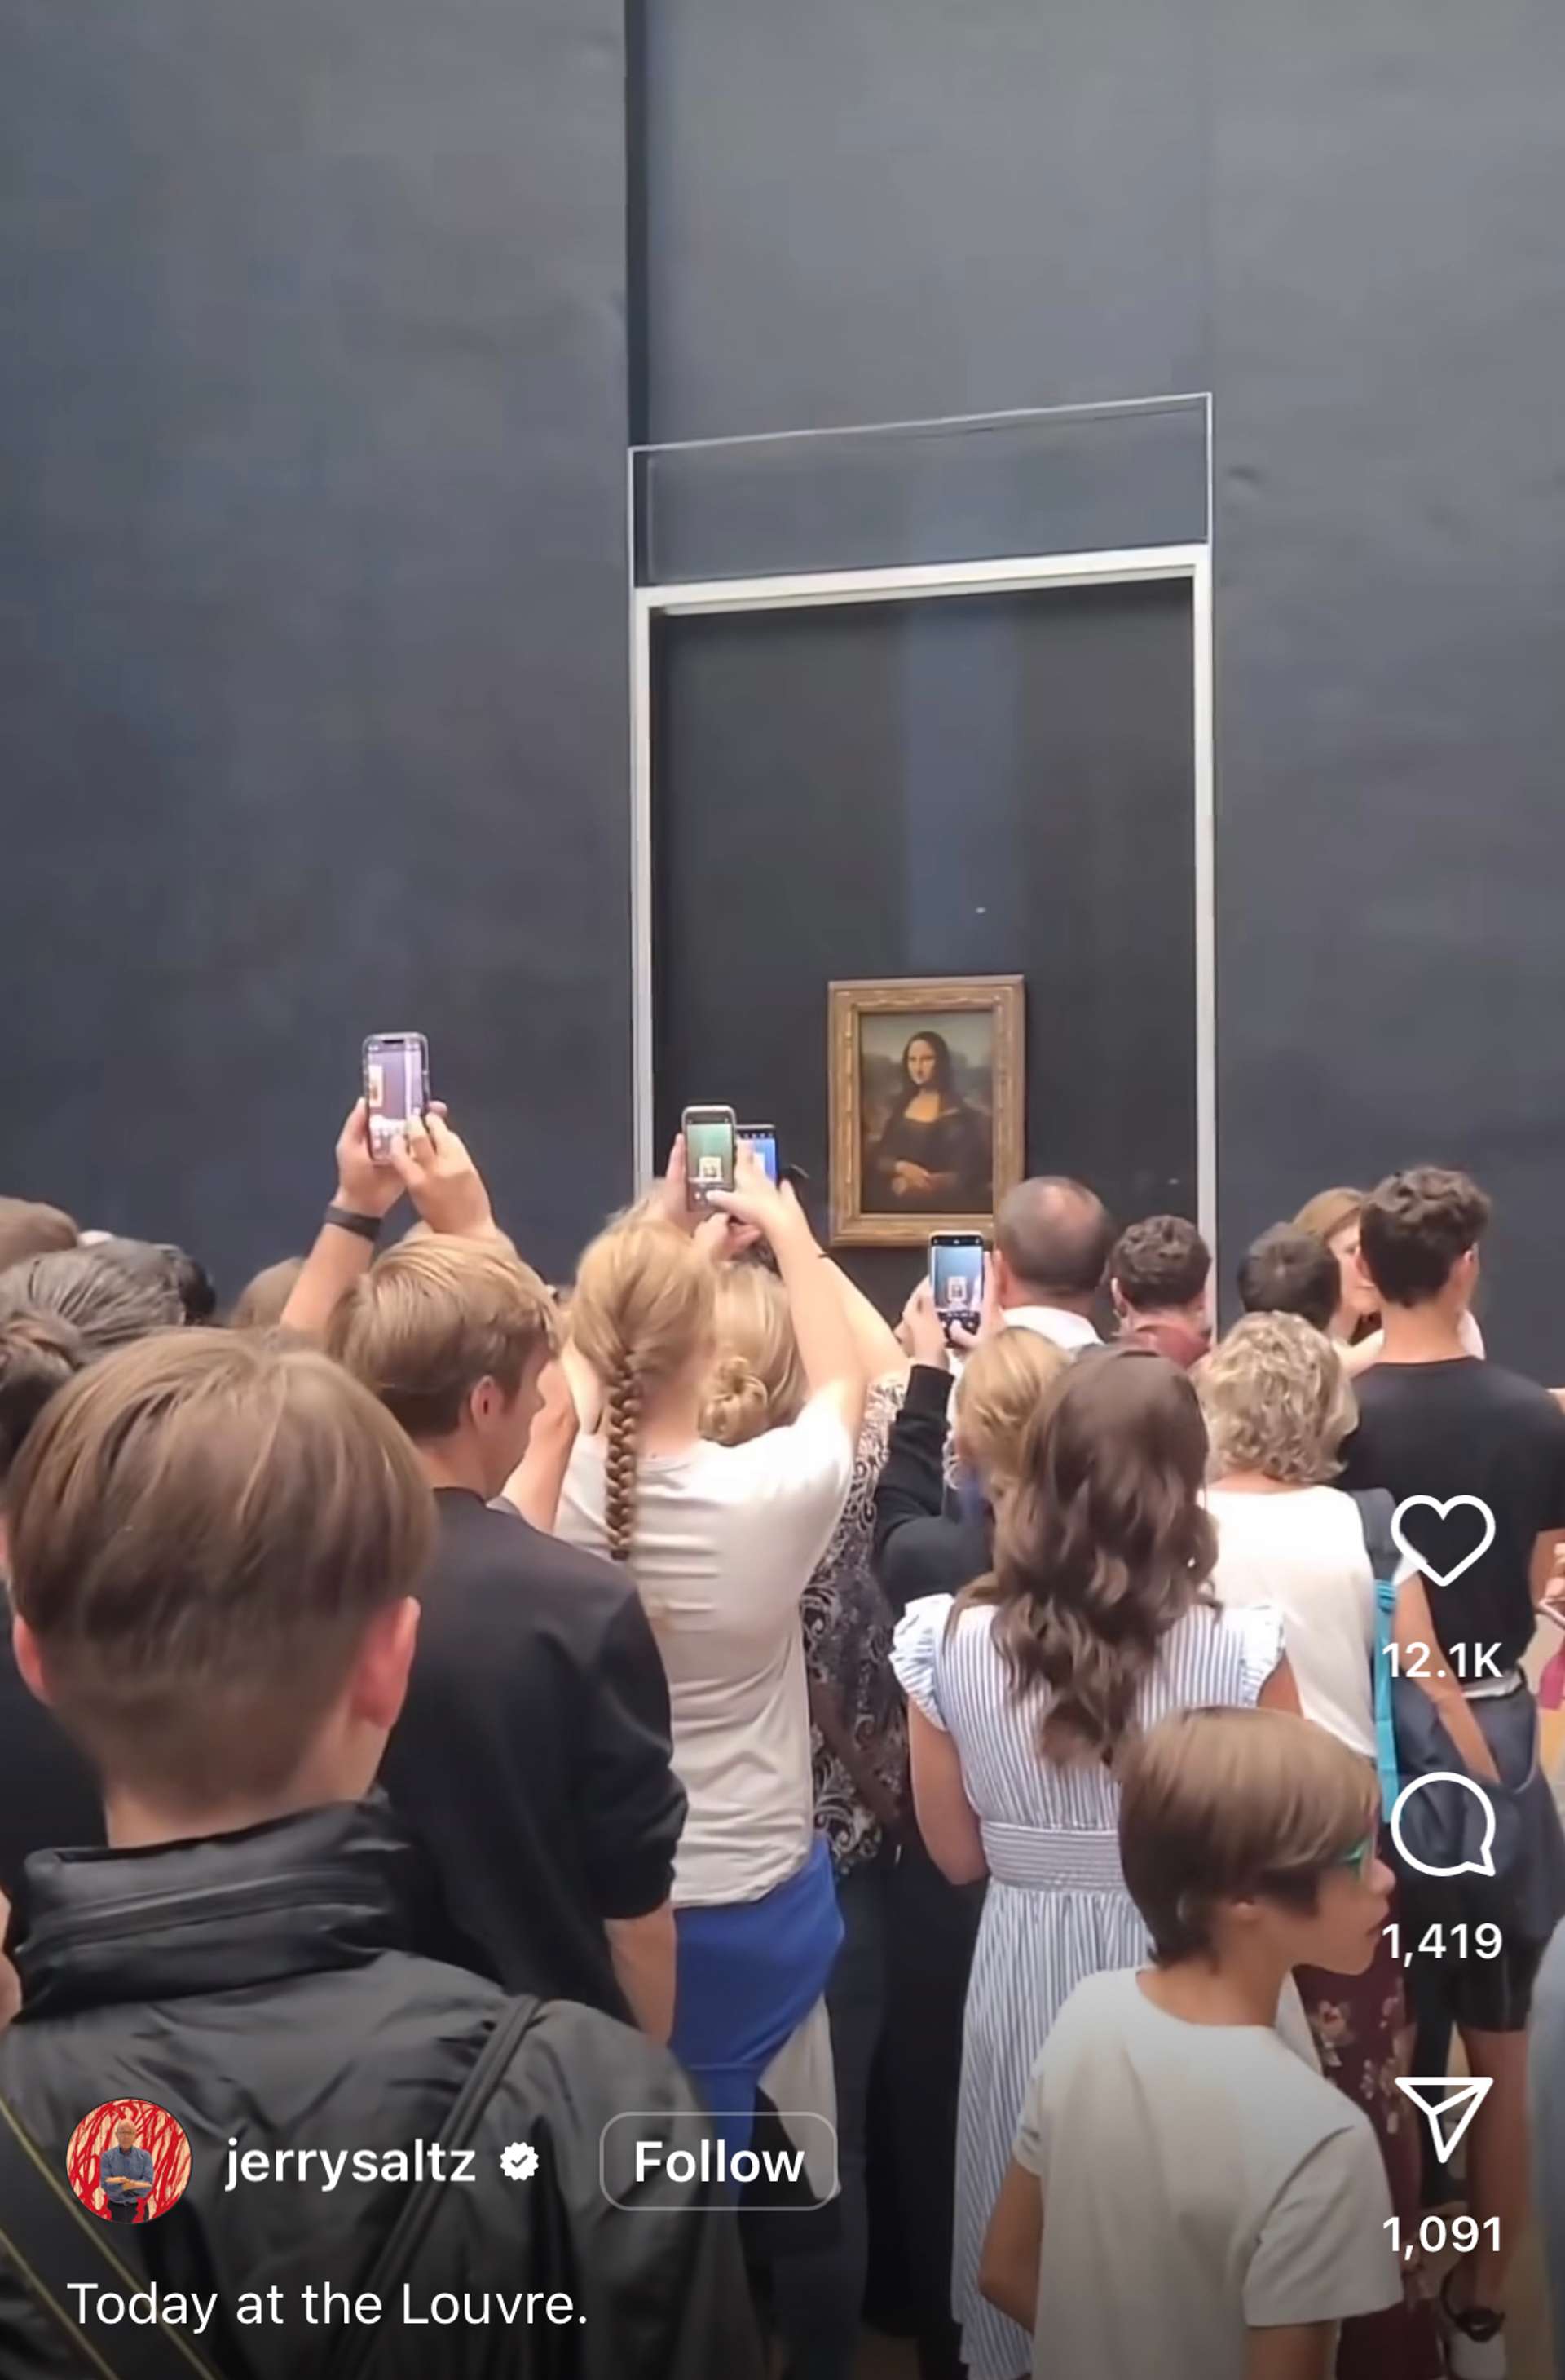 People holding up their smartphones to photograph the Mona Lisa inside the Louvre Museum. 